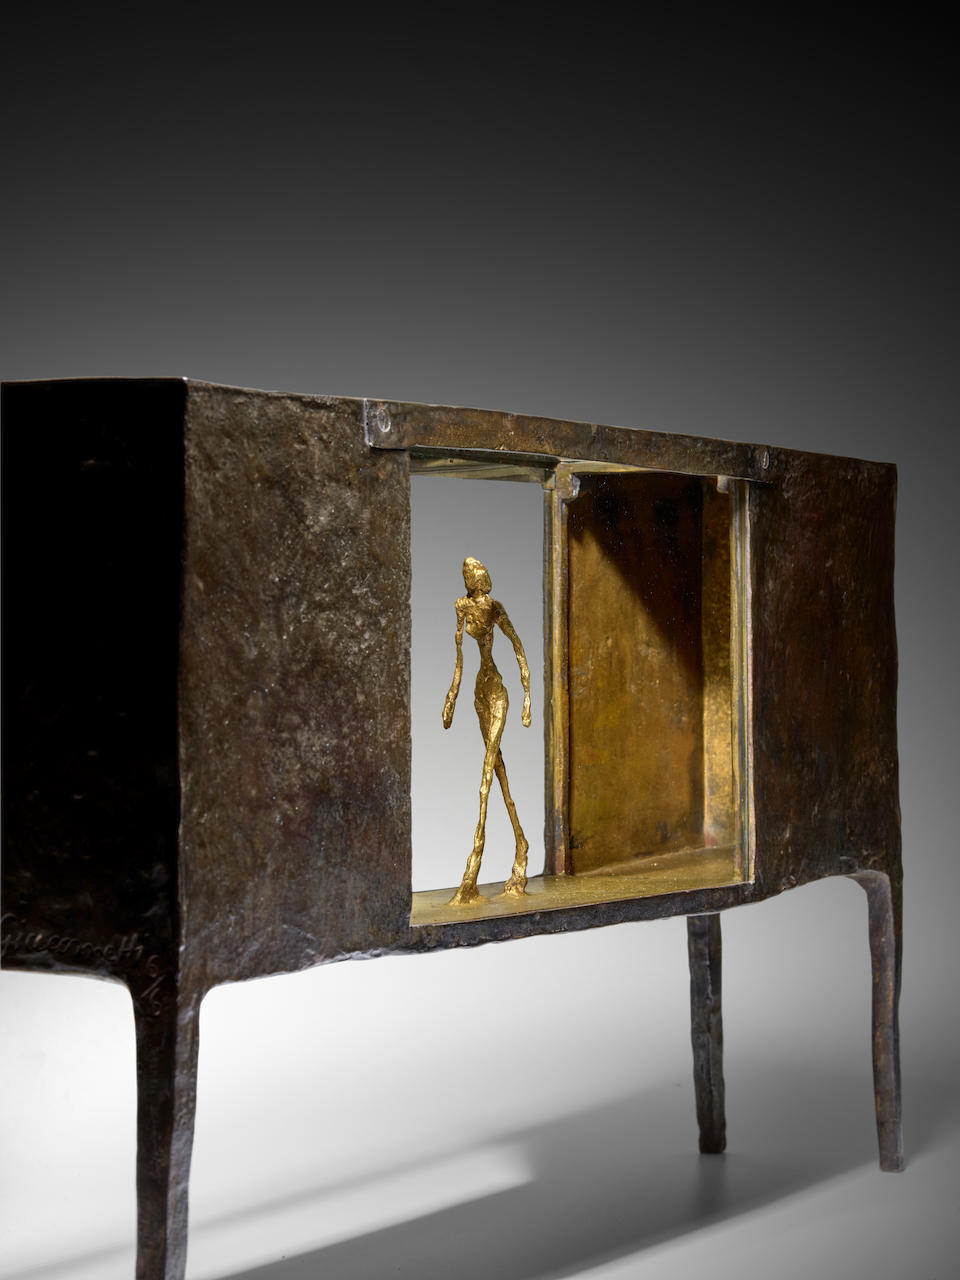 ALBERTO GIACOMETTI (1901-1966) Figurine entre deux maisons 11 5/8 x 21 x 3 11/16 in (29.5 x 53.3 x 9.4 cm) (Conceived in 1950. This bronze version cast in 1952 by the Alexis Rudier Foundry in an edition of 6, of which two are numbered 6/6)